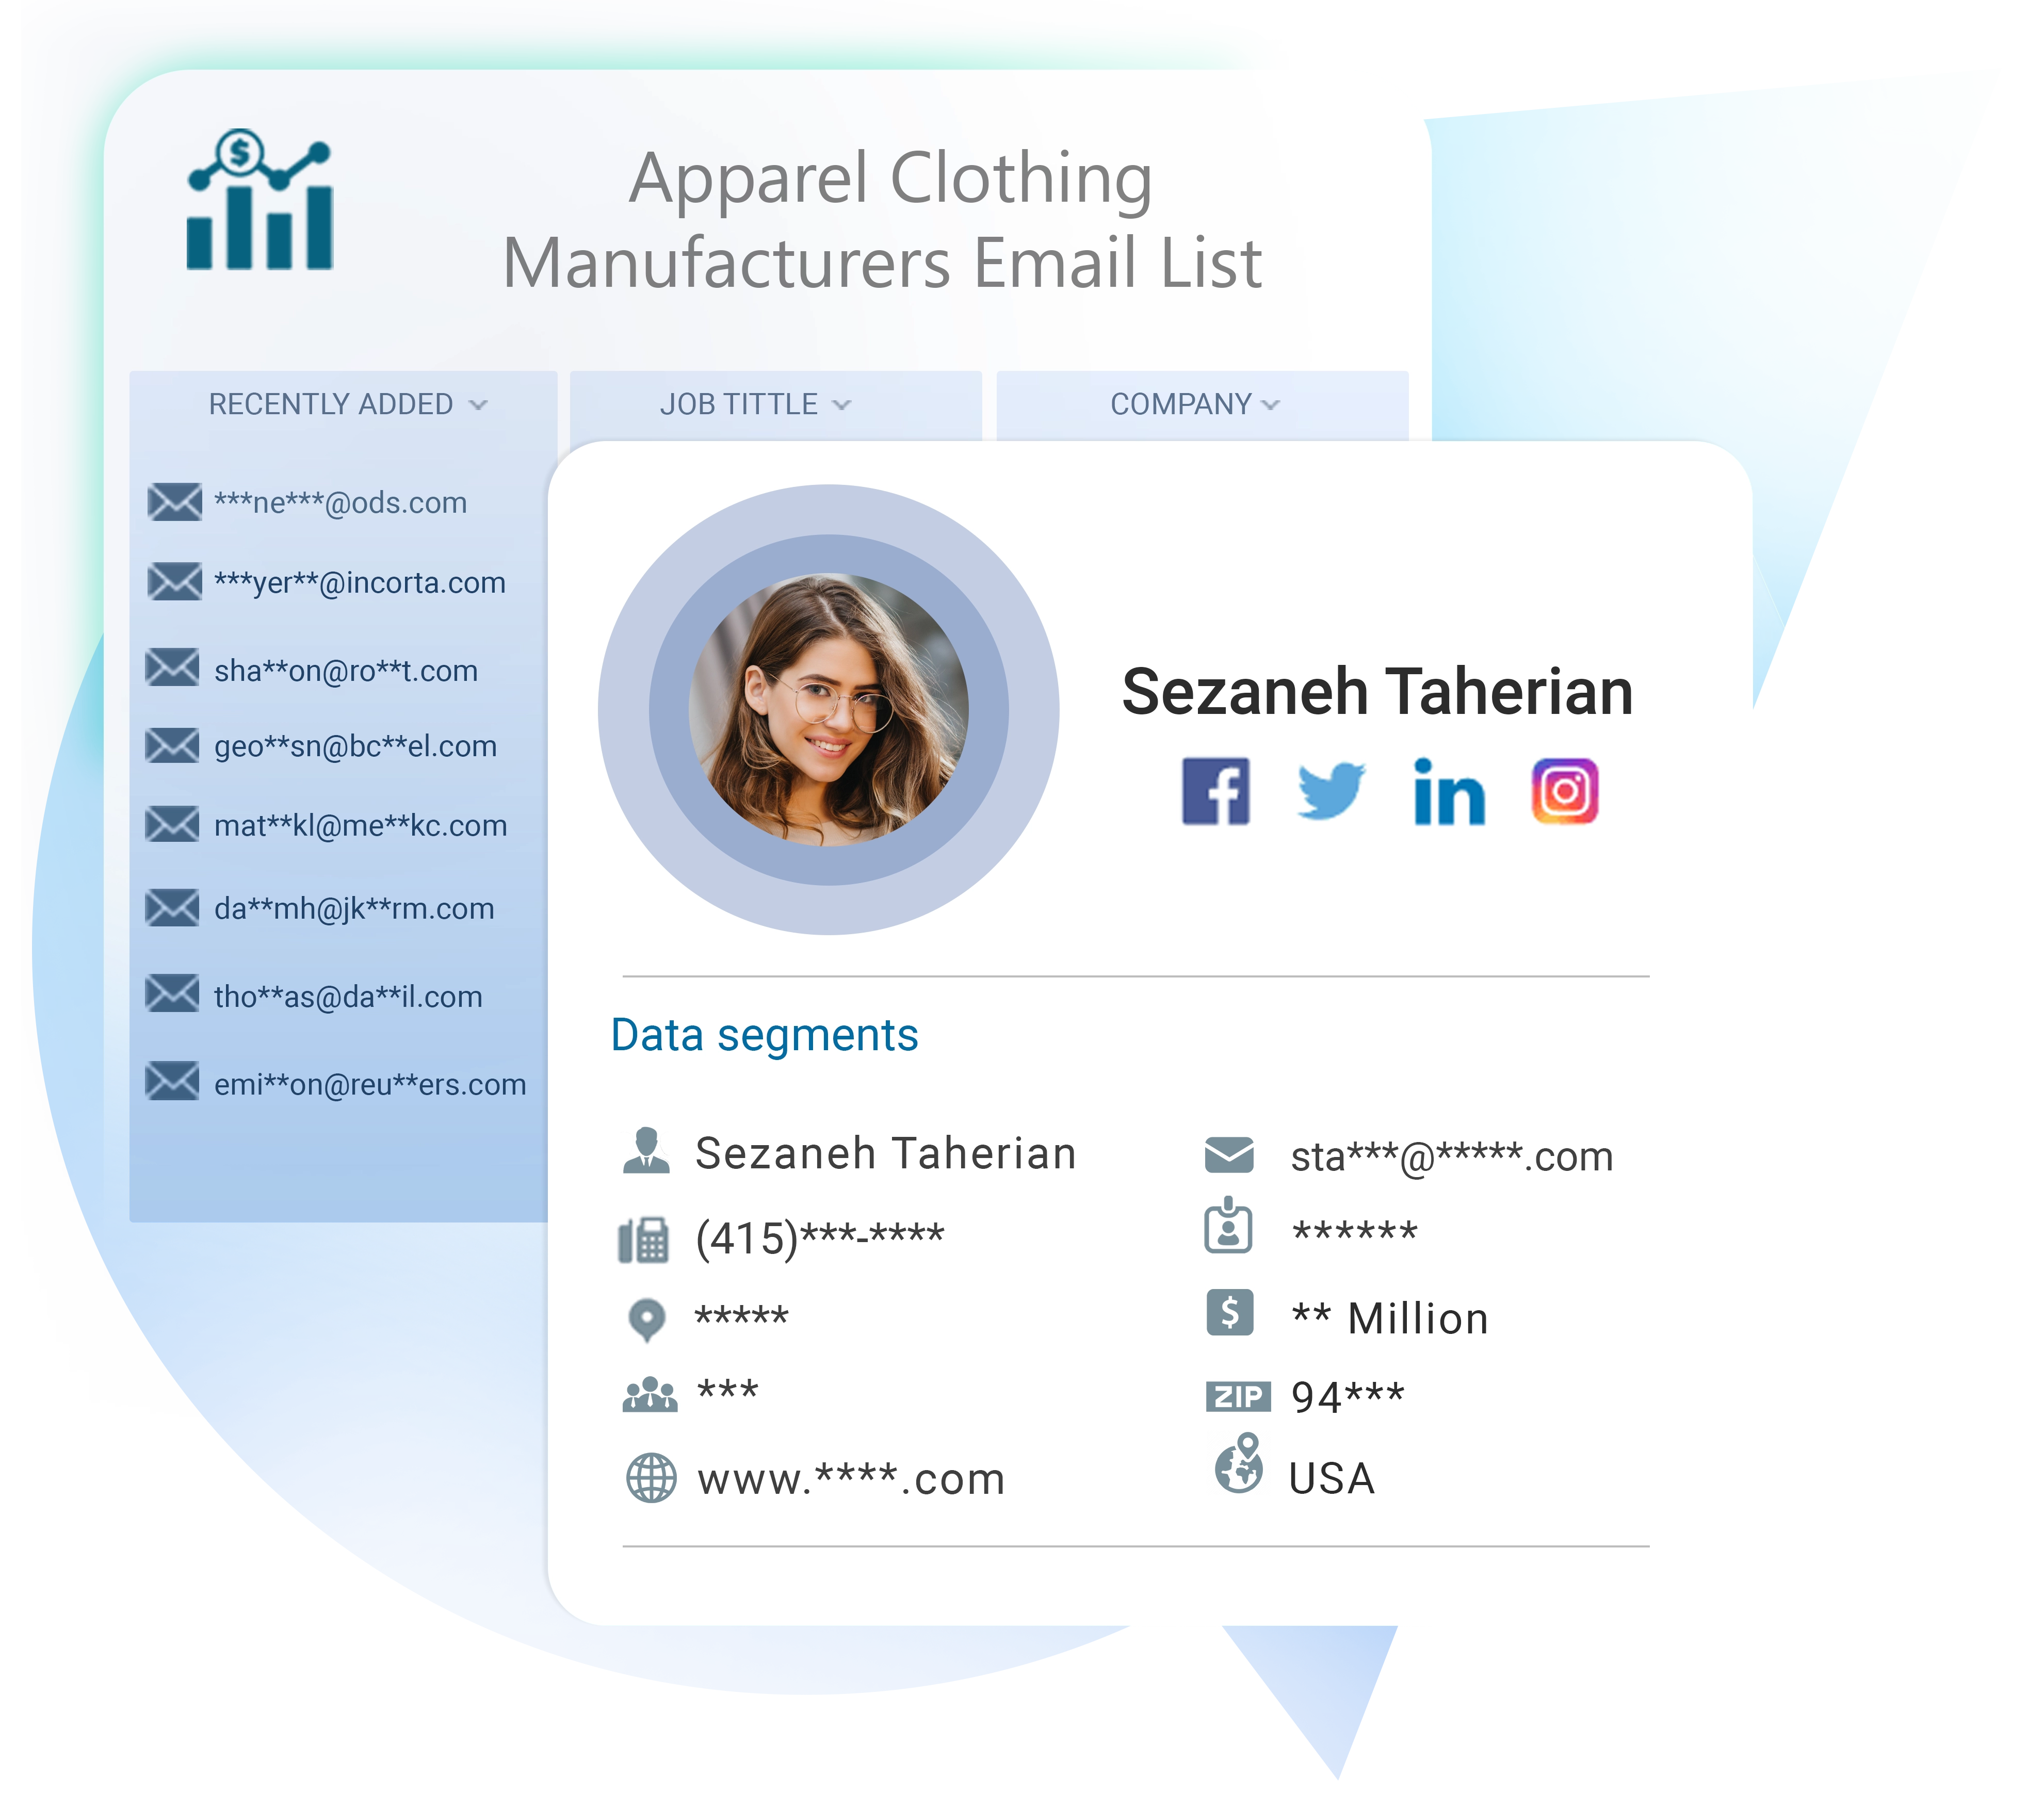 Apparel Clothing Manufacturers List